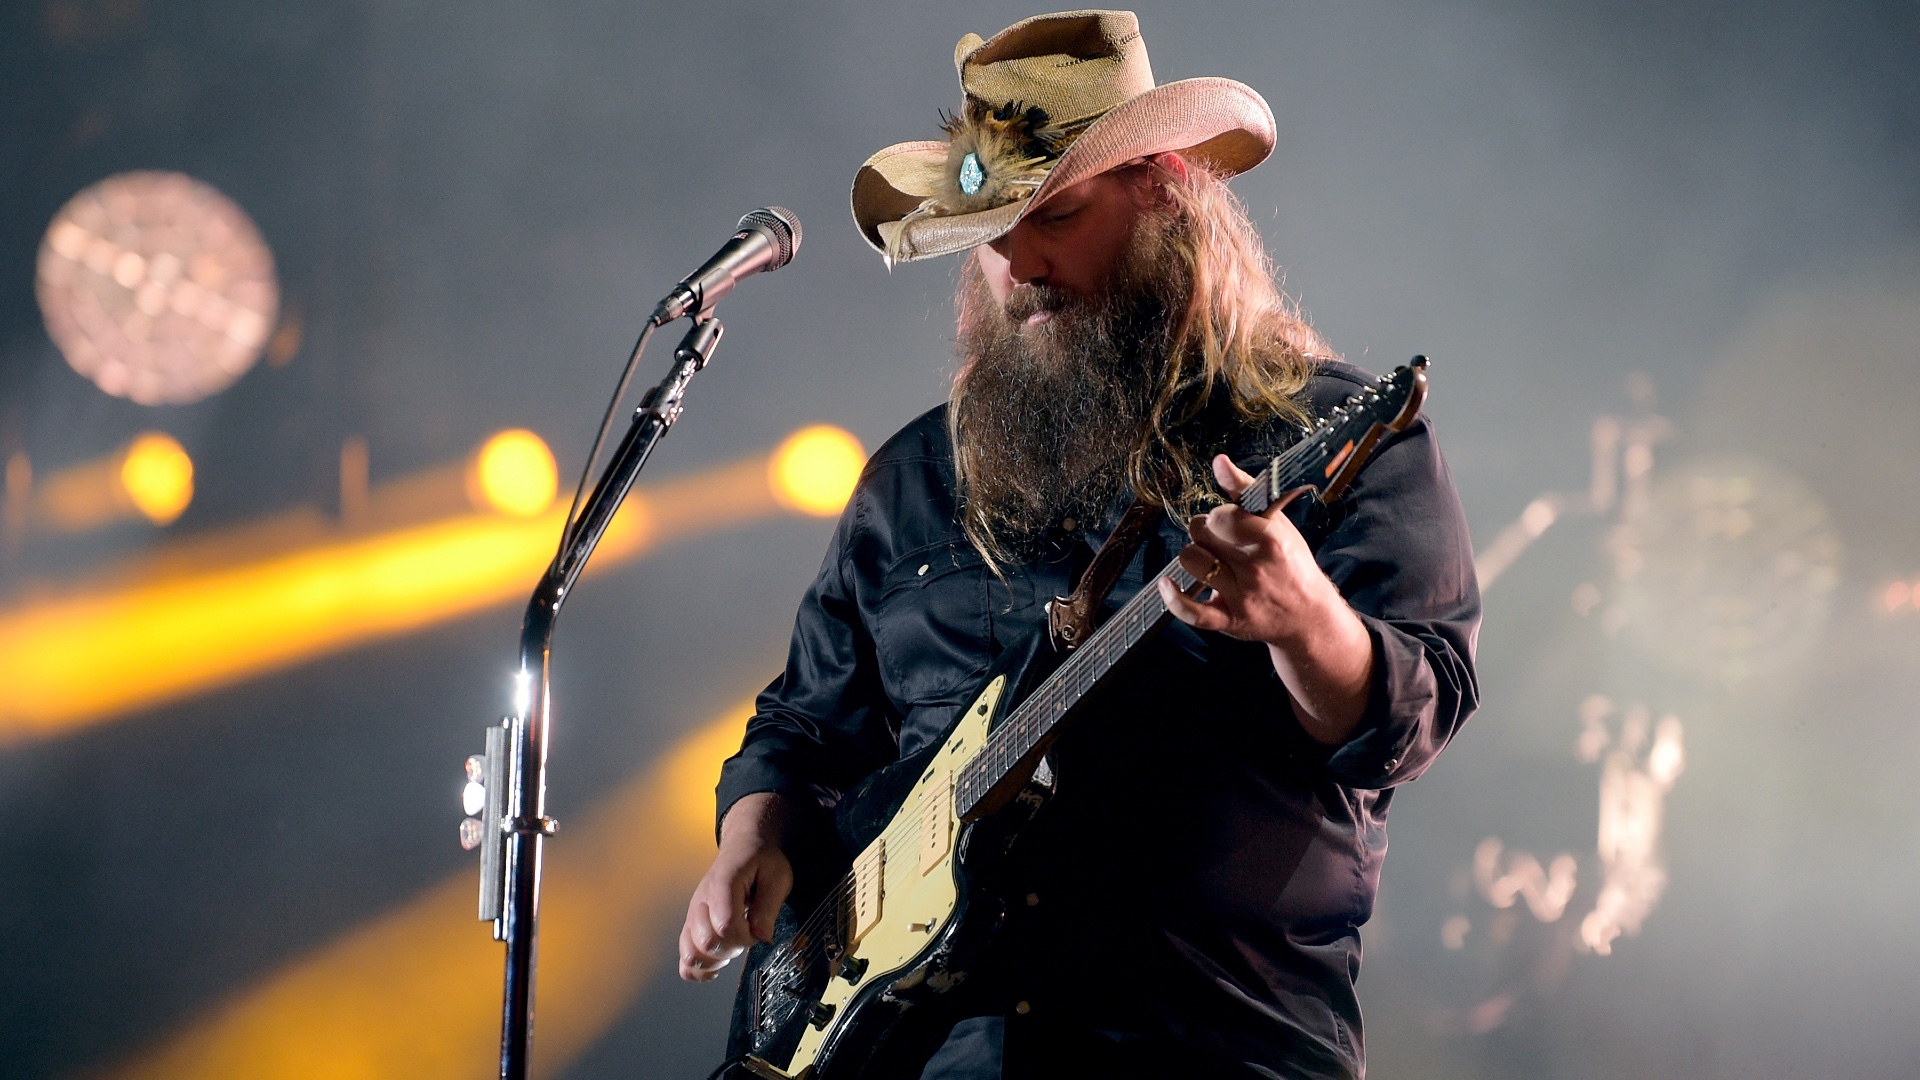 Chris Stapleton opens up about his choice to embrace sobriety.